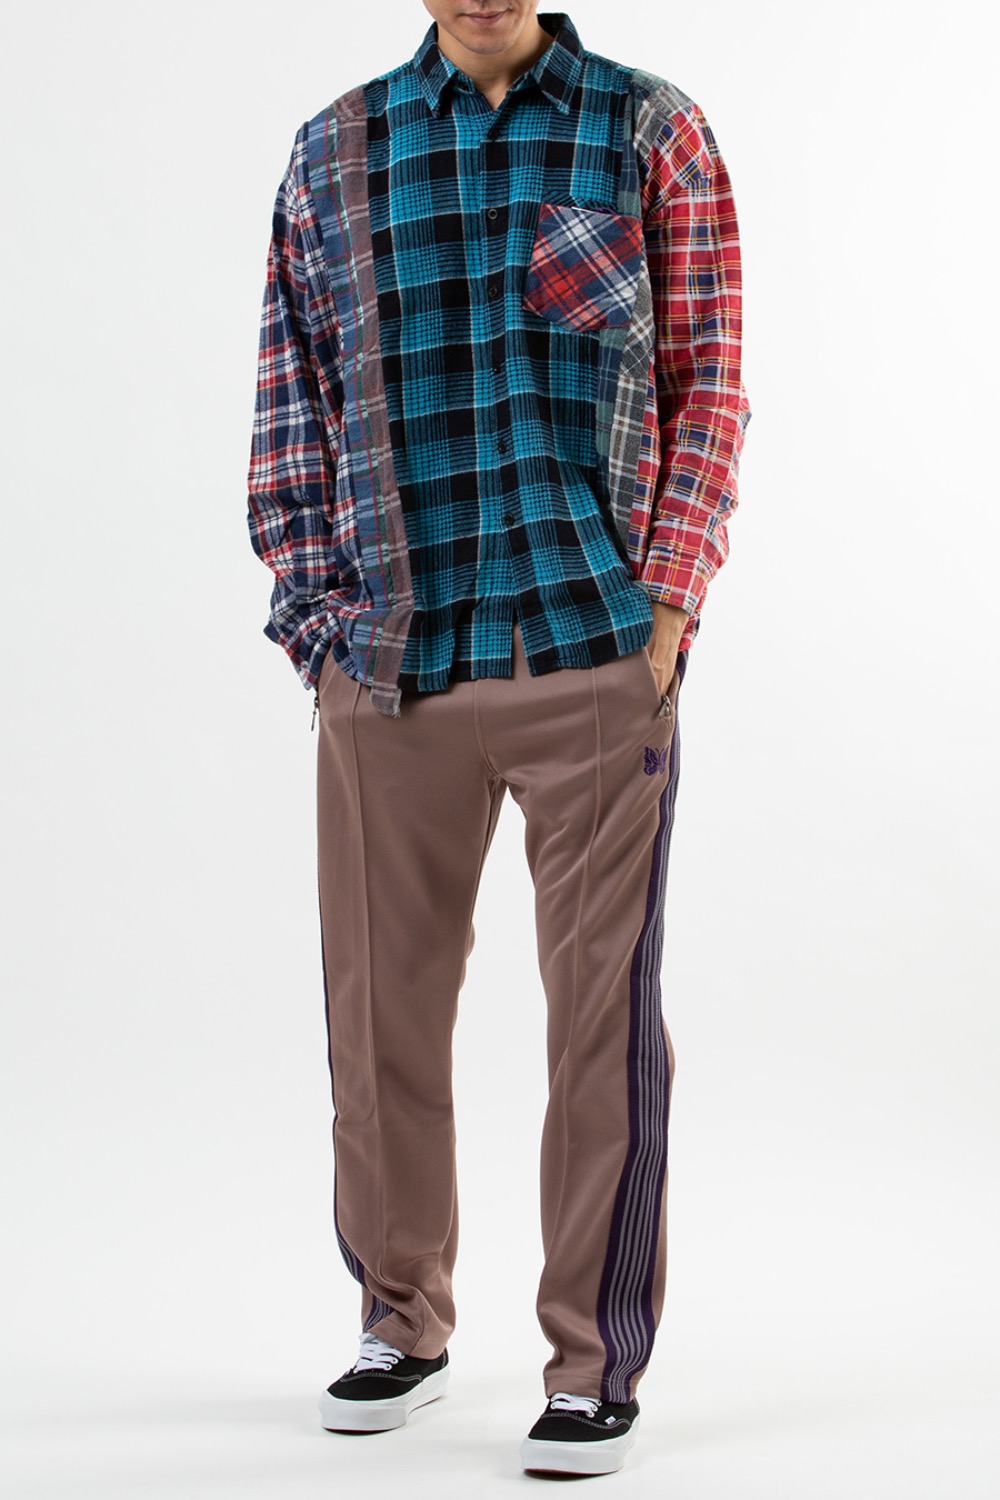 (22FW) - LQ306 Rebuild by Needles Flannel Shirt -&gt; 7 Cuts Wide Shirt (FREE - 6) ASSORTED